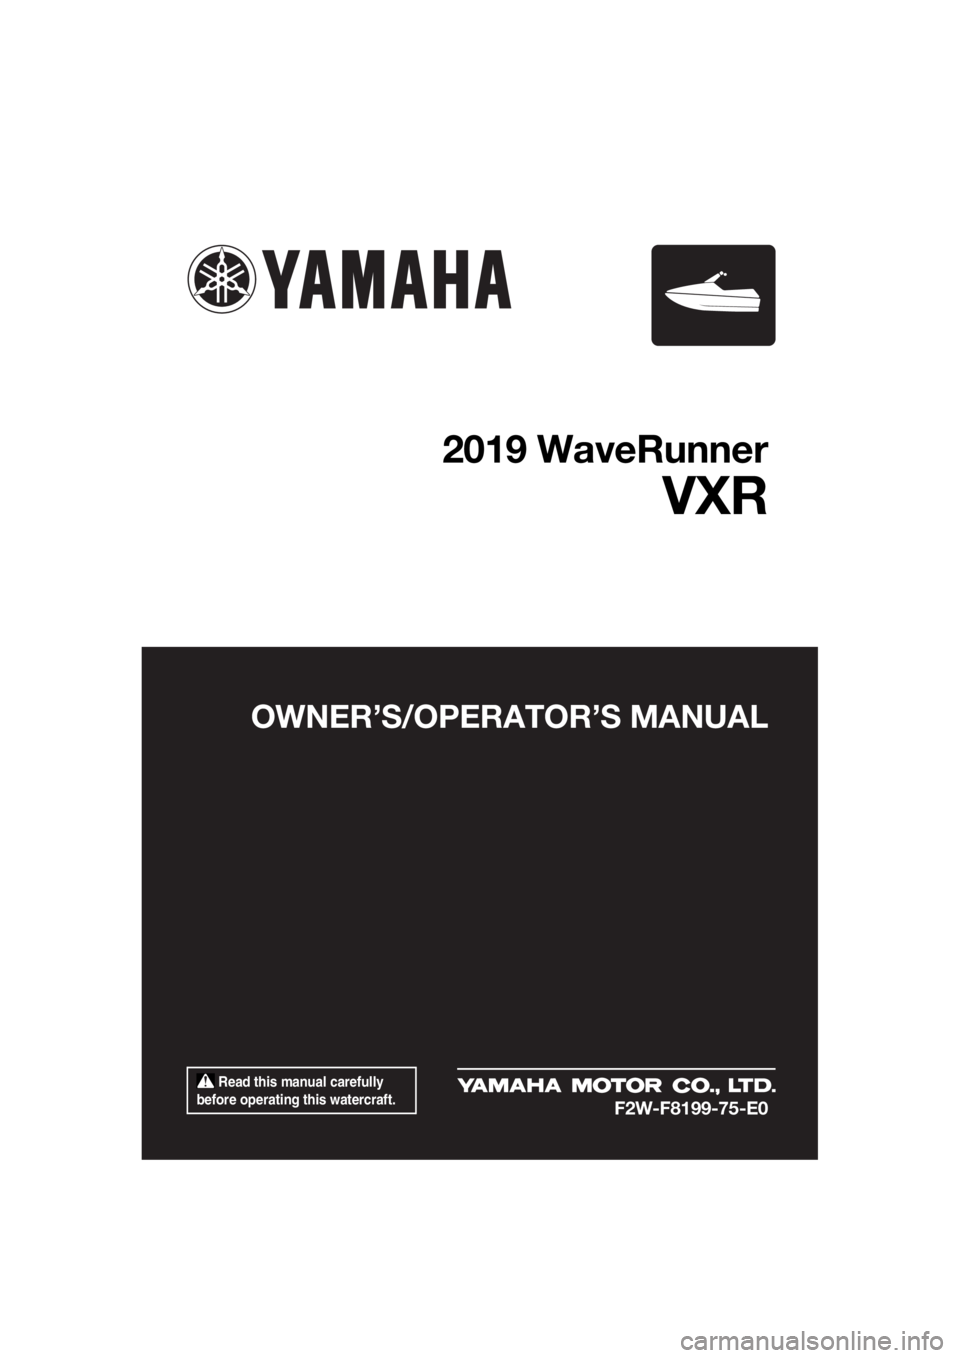 YAMAHA VXR 2019  Owners Manual  Read this manual carefully 
before operating this watercraft.
OWNER’S/OPERATOR’S MANUAL
2019 WaveRunner
VXR
F2W-F8199-75-E0
UF2W75E0.book  Page 1  Friday, July 20, 2018  3:33 PM 